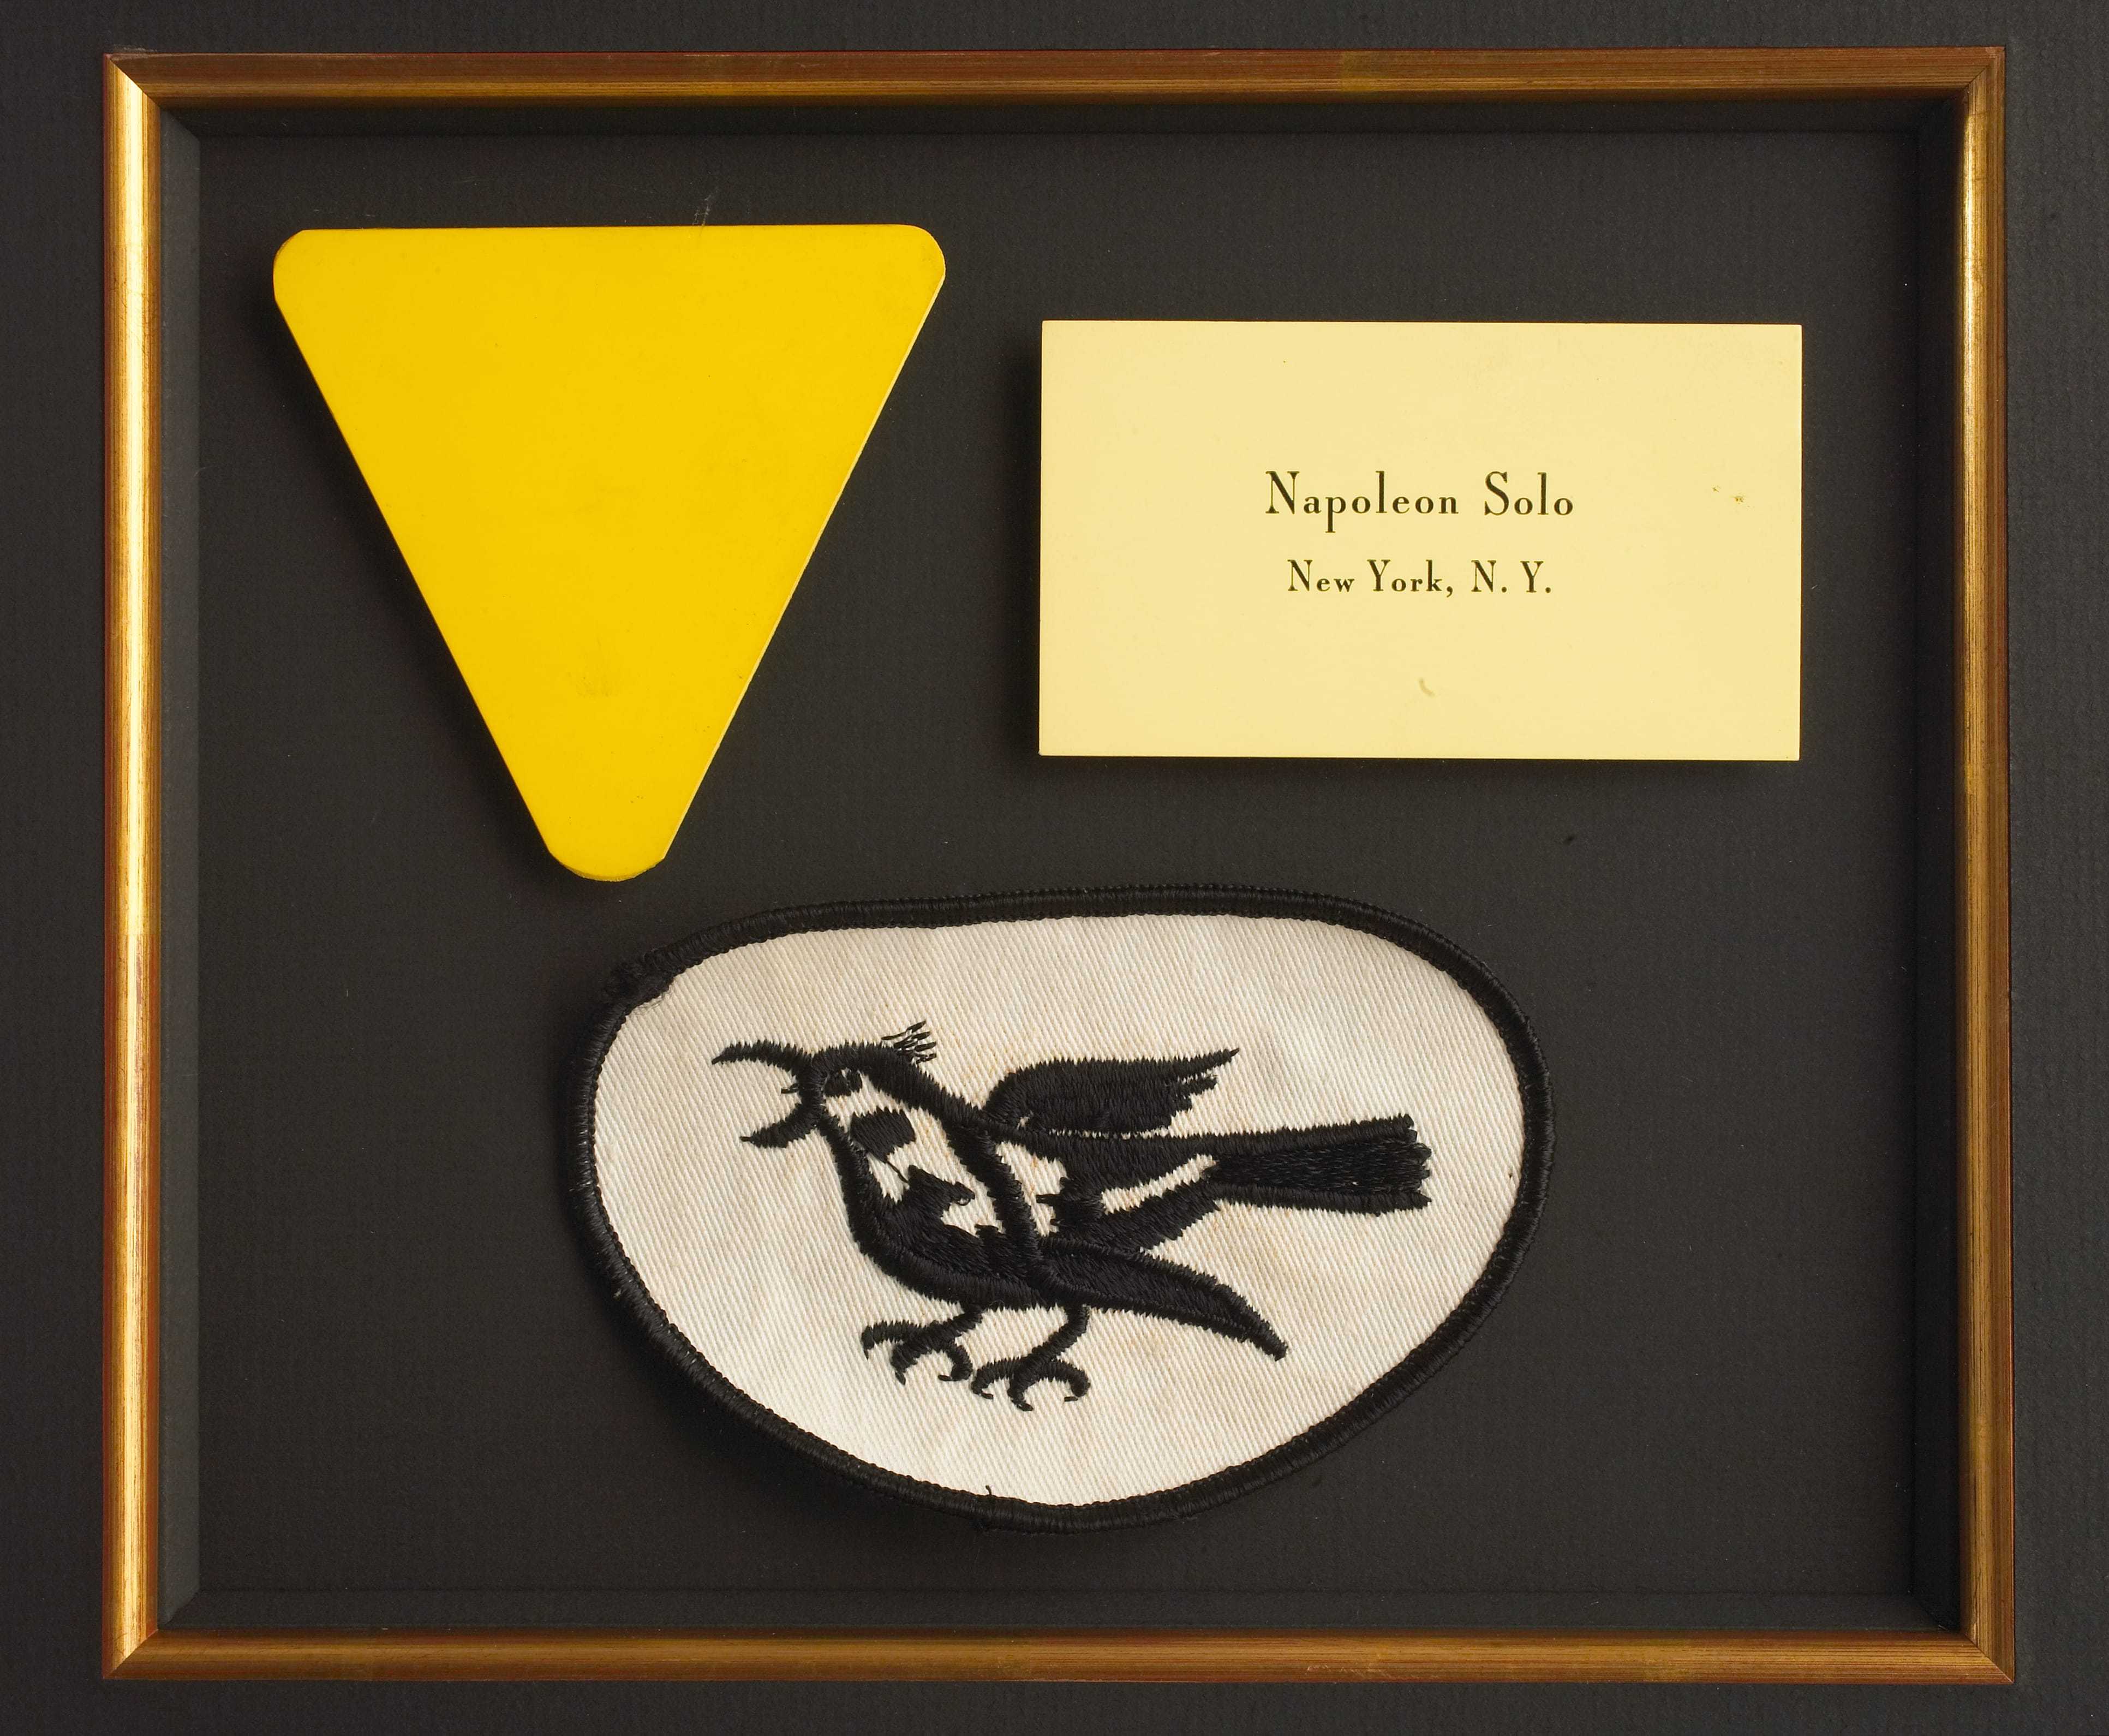 A yellow security badge, a patch with a bird insignia, and an business card for Napoleon Solo